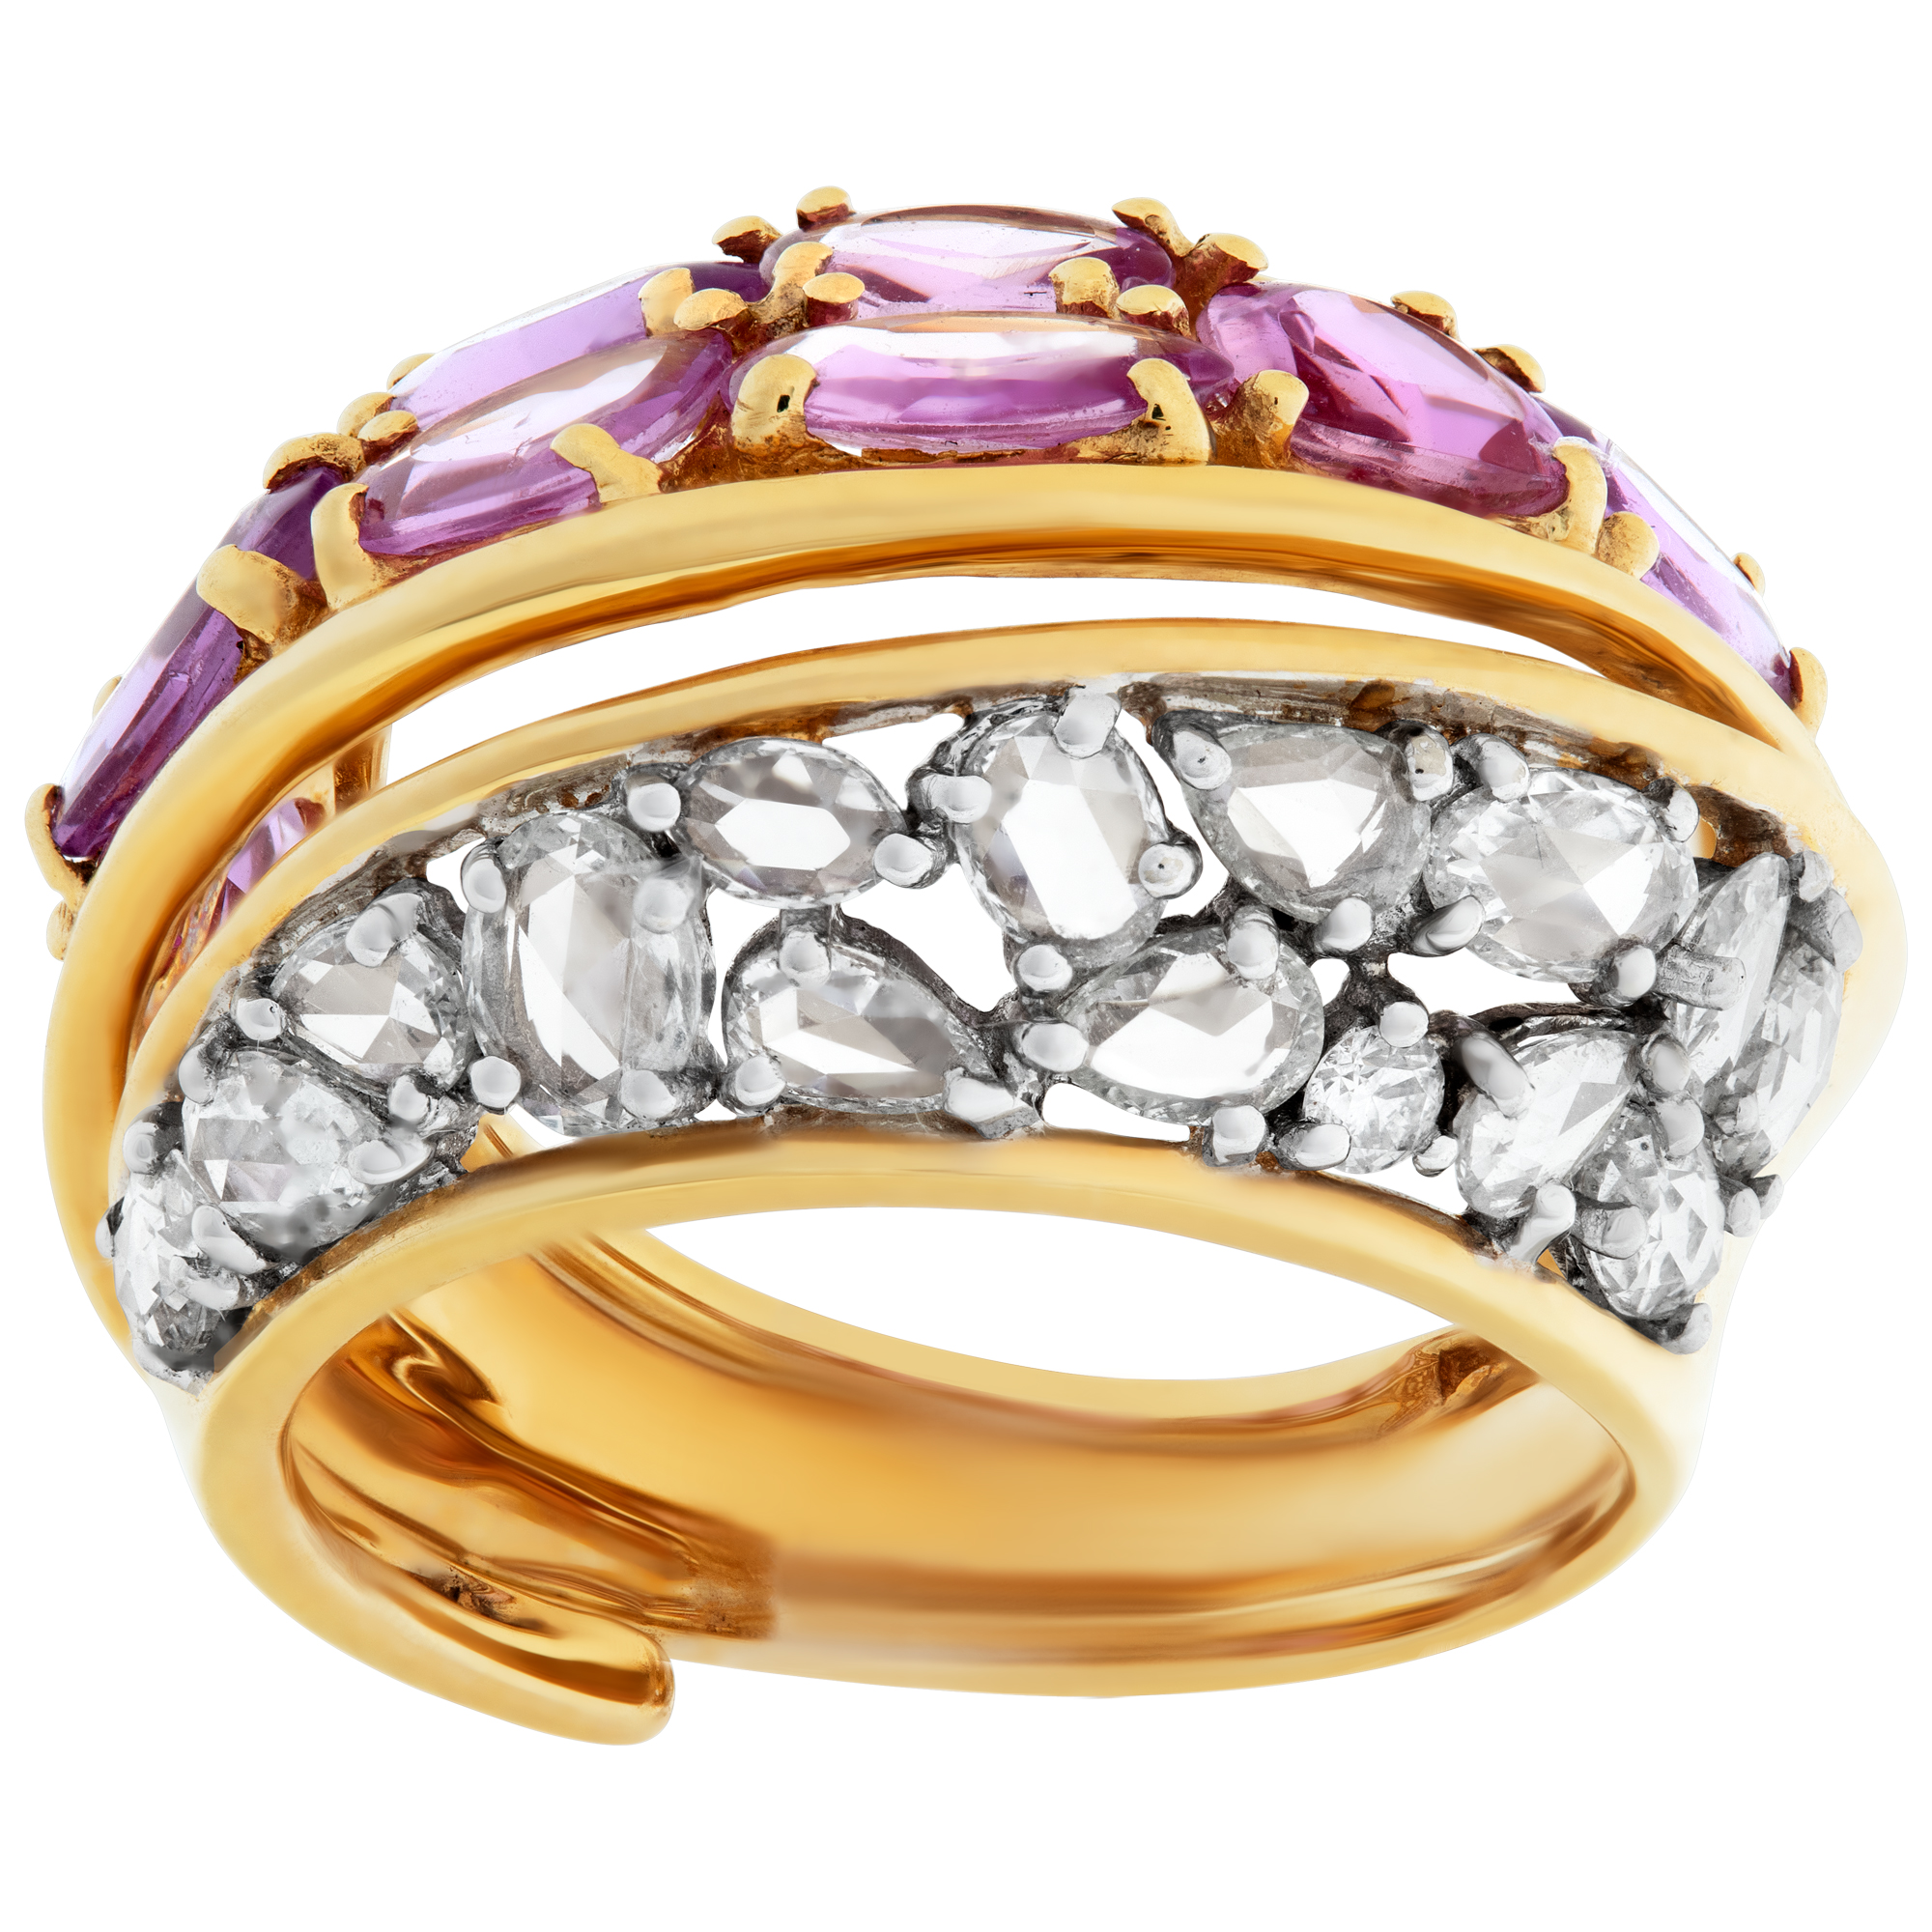 Pink Sapphire (4.32cts) and Diamond (0.98cts) ring in 18k yellow gold. Size 7. image 1